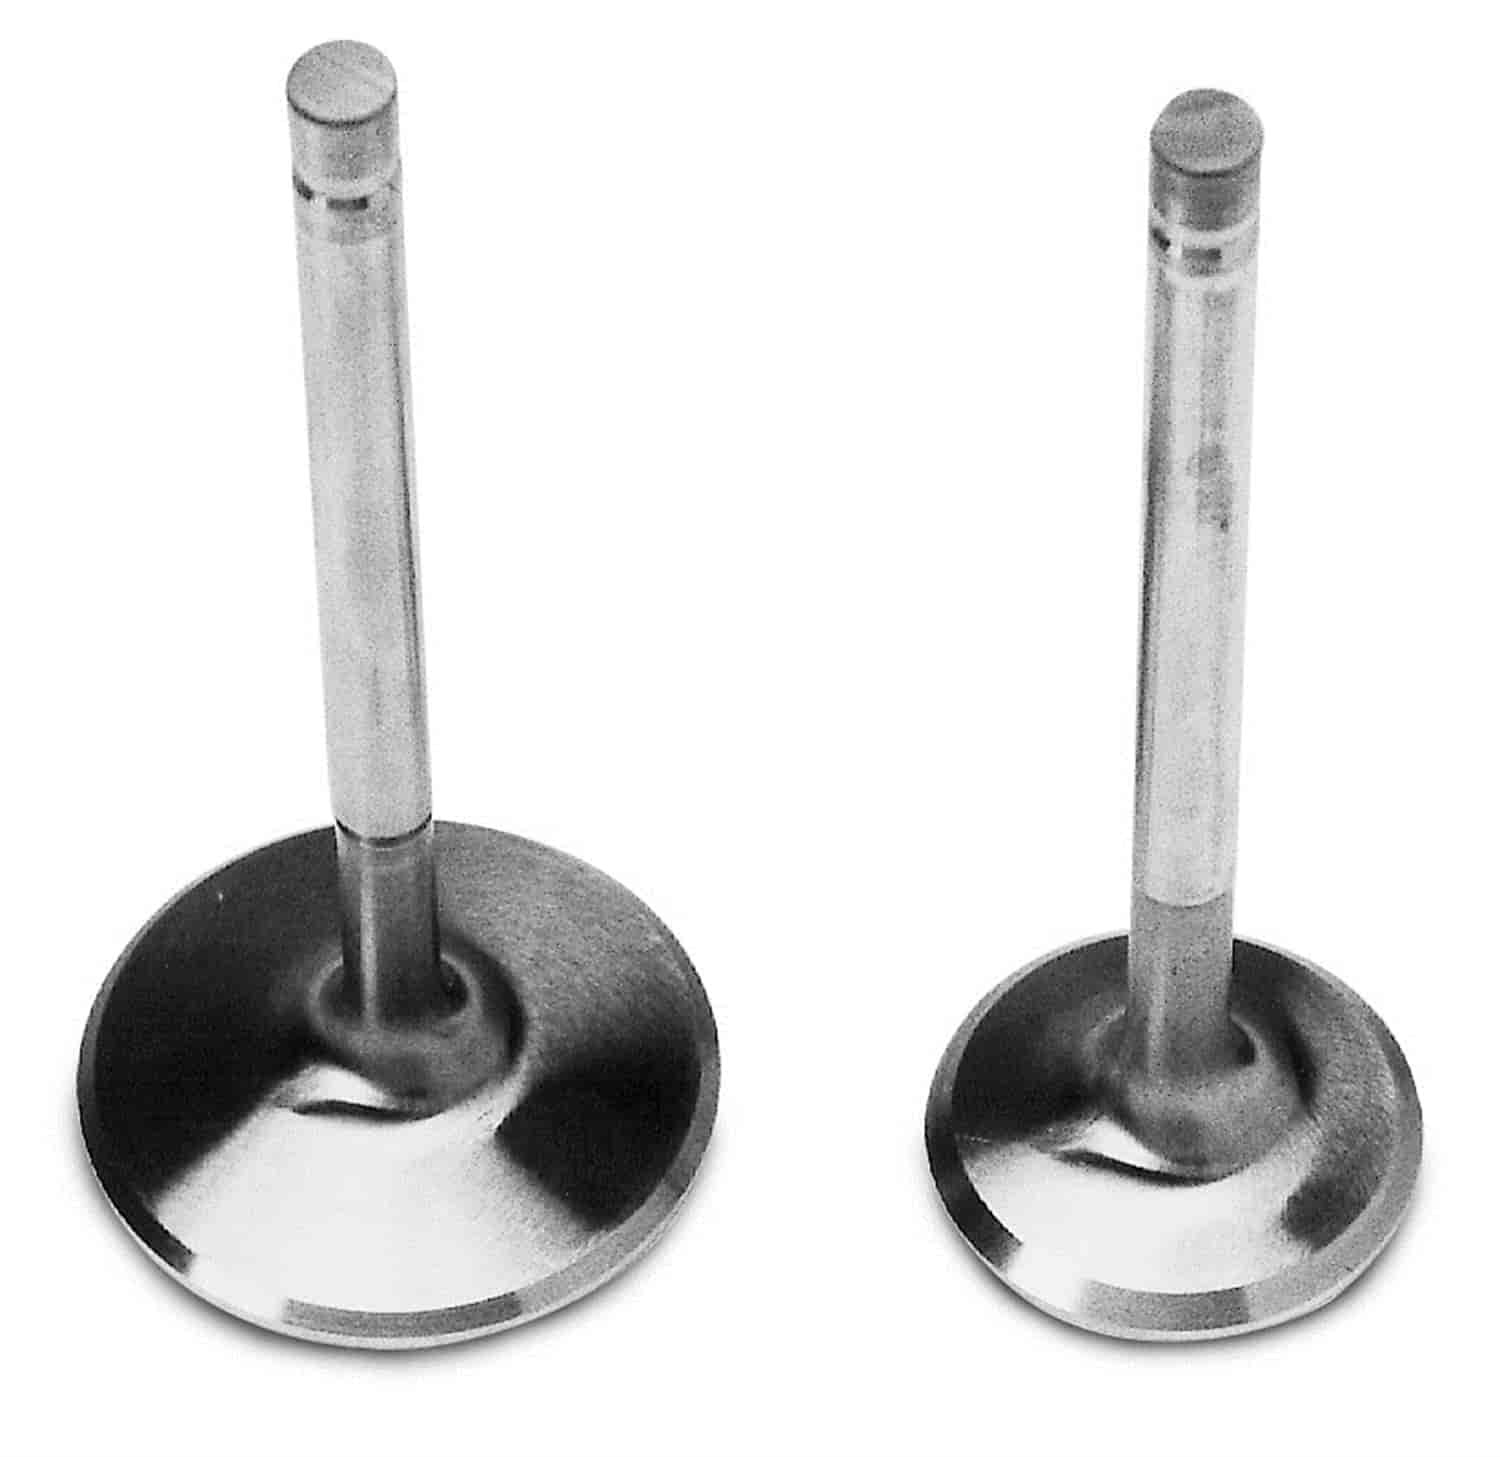 Exhaust Valve Set 1.90" for Big Block Chevy Victor 24 Degree Heads #350-77409